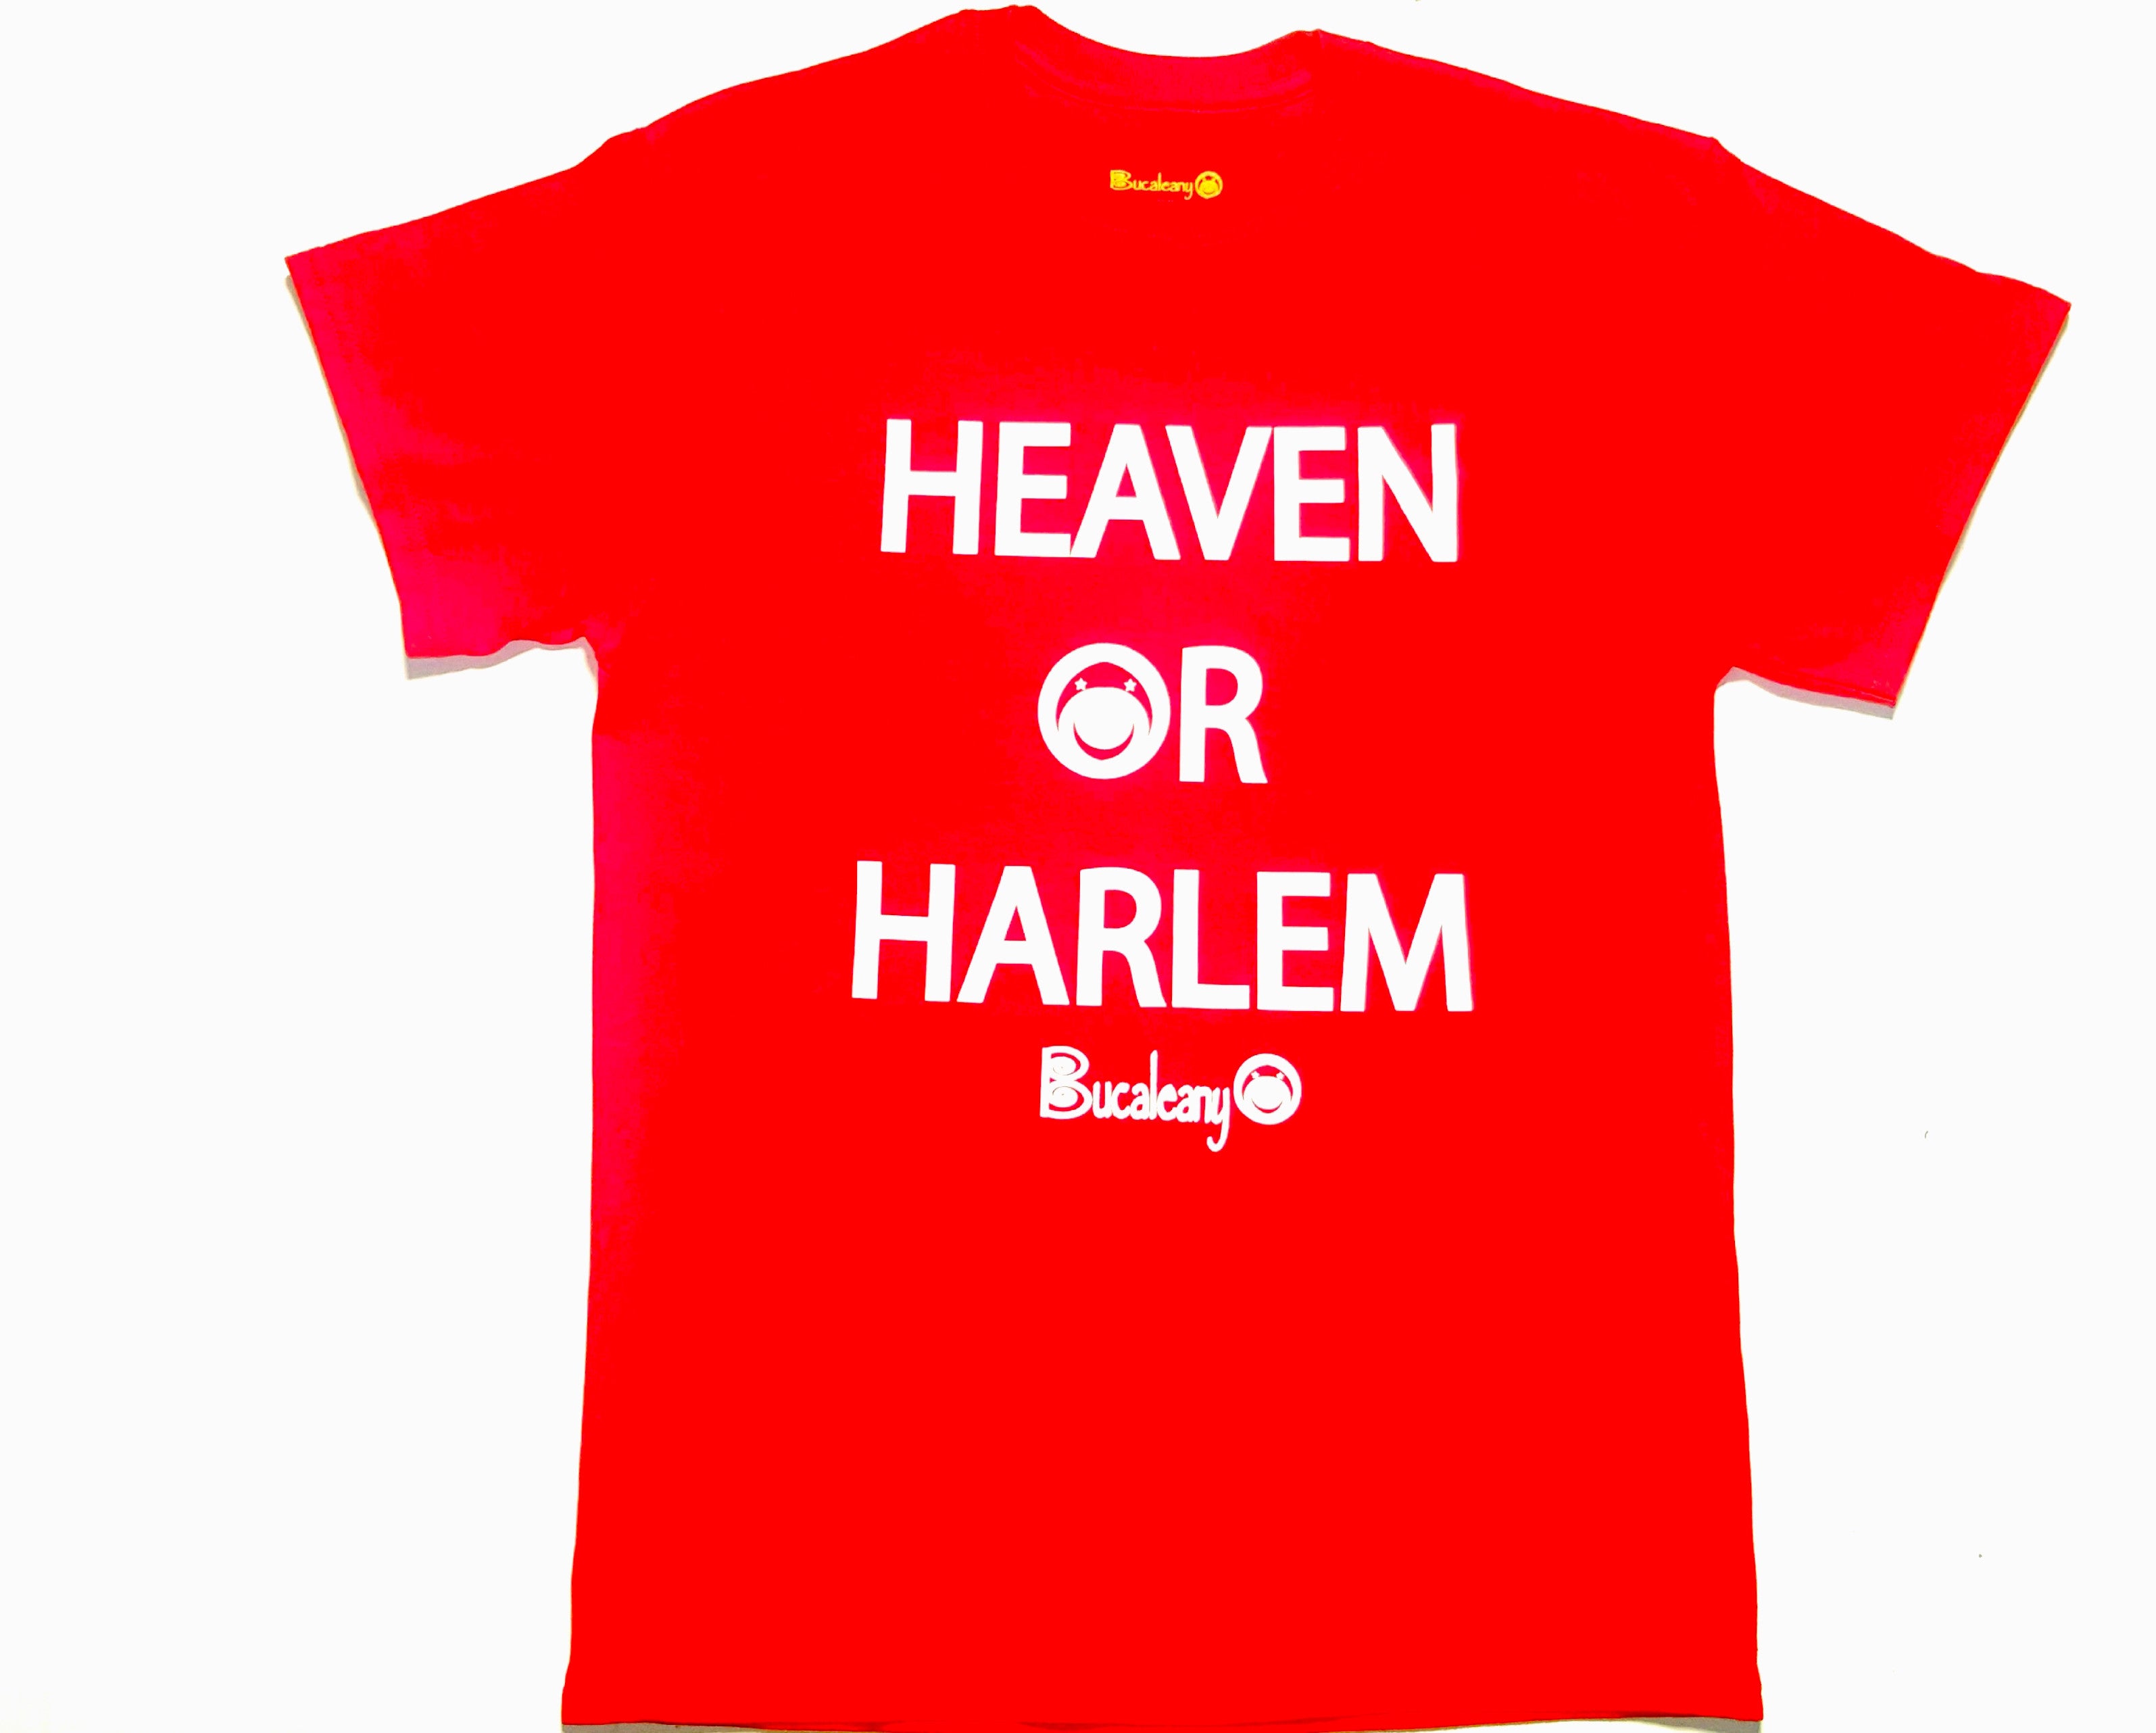 Heaven Or Harlem! Wouldn't Want To Be Any Place Else!